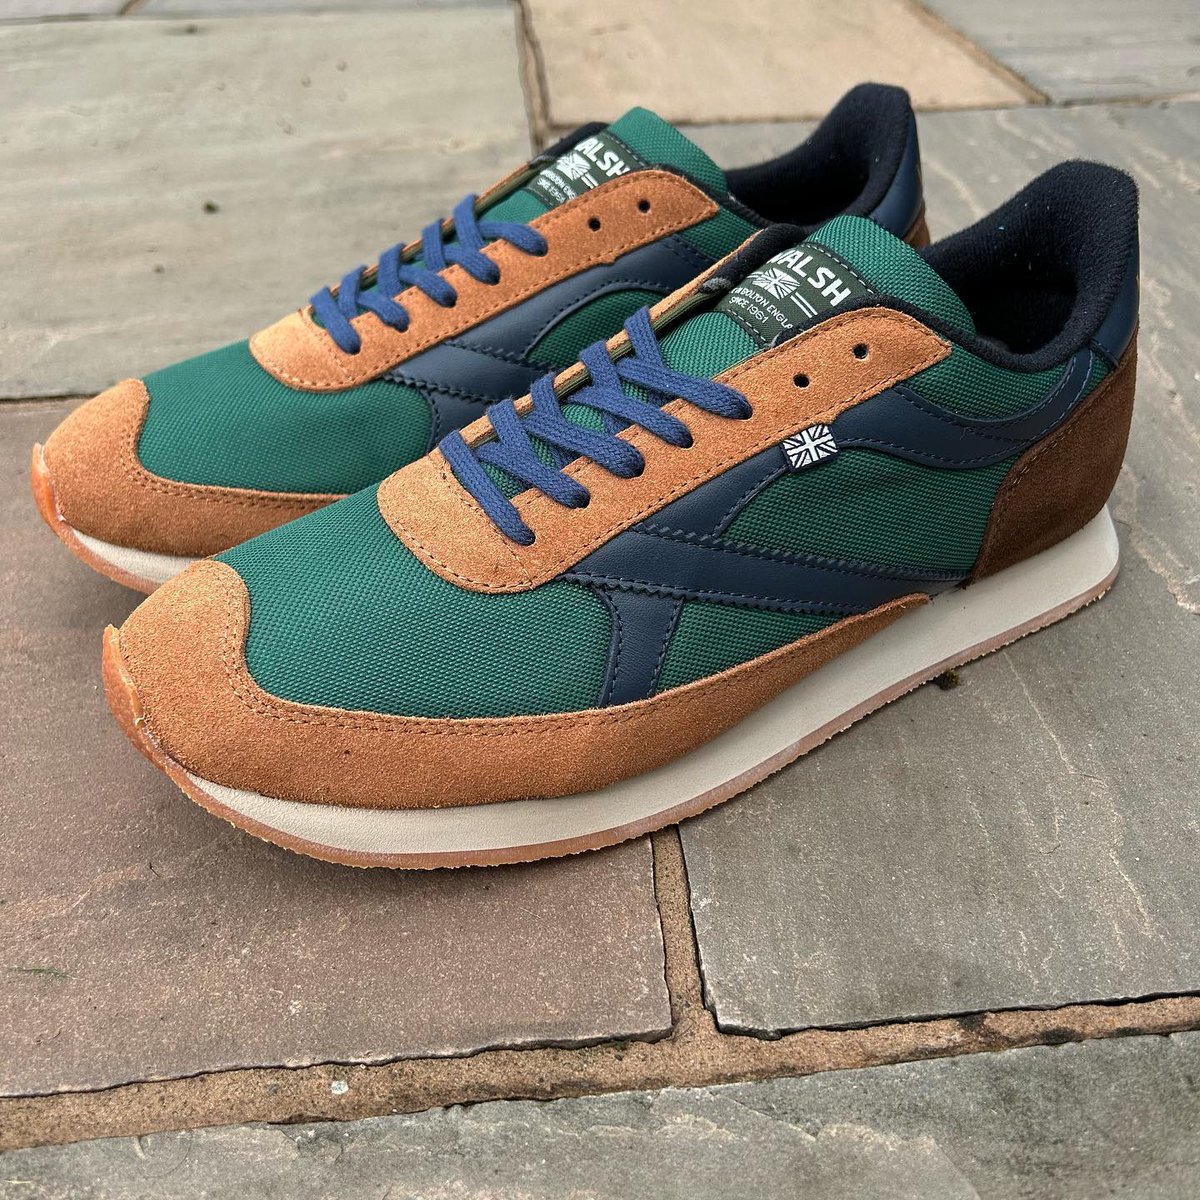 Shop Up to 60% Off in the Walsh Summer Sale. Shop Online Now - normanwalshuk.com #normanwalsh #britishmade #sneakers #trainers #ukmfg #madeinbritain